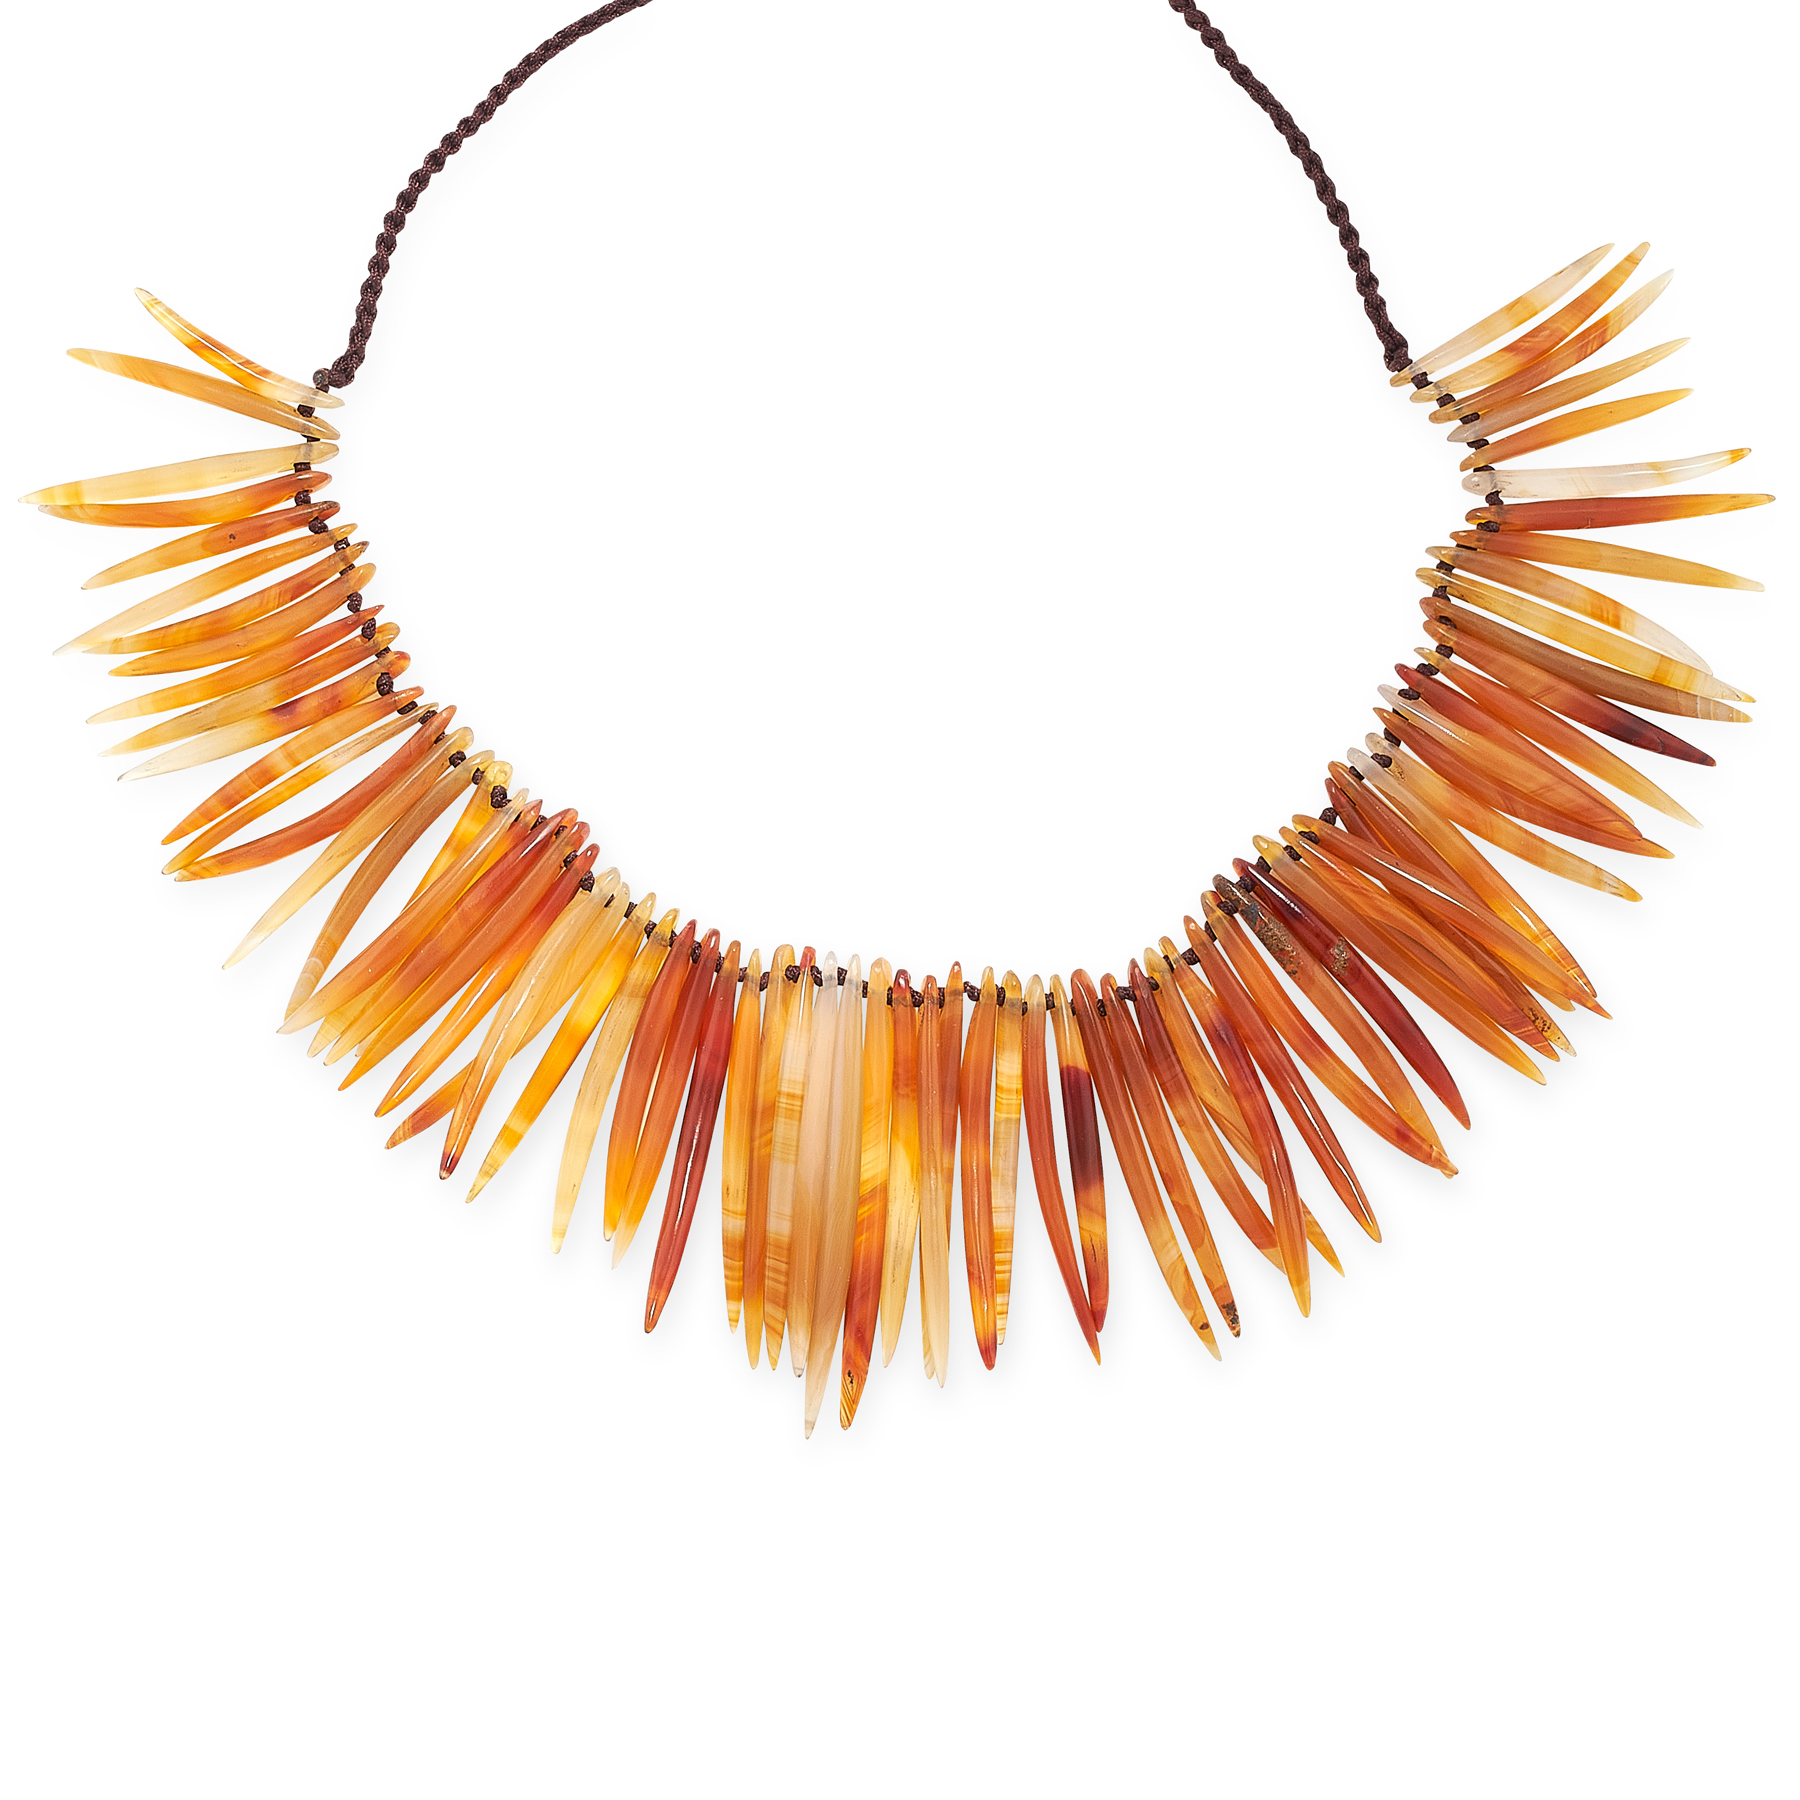 AN AGATE QUILL NECKLACE, PROBABLY TIBETAN formed of a fringe of seventy-four graduated polished